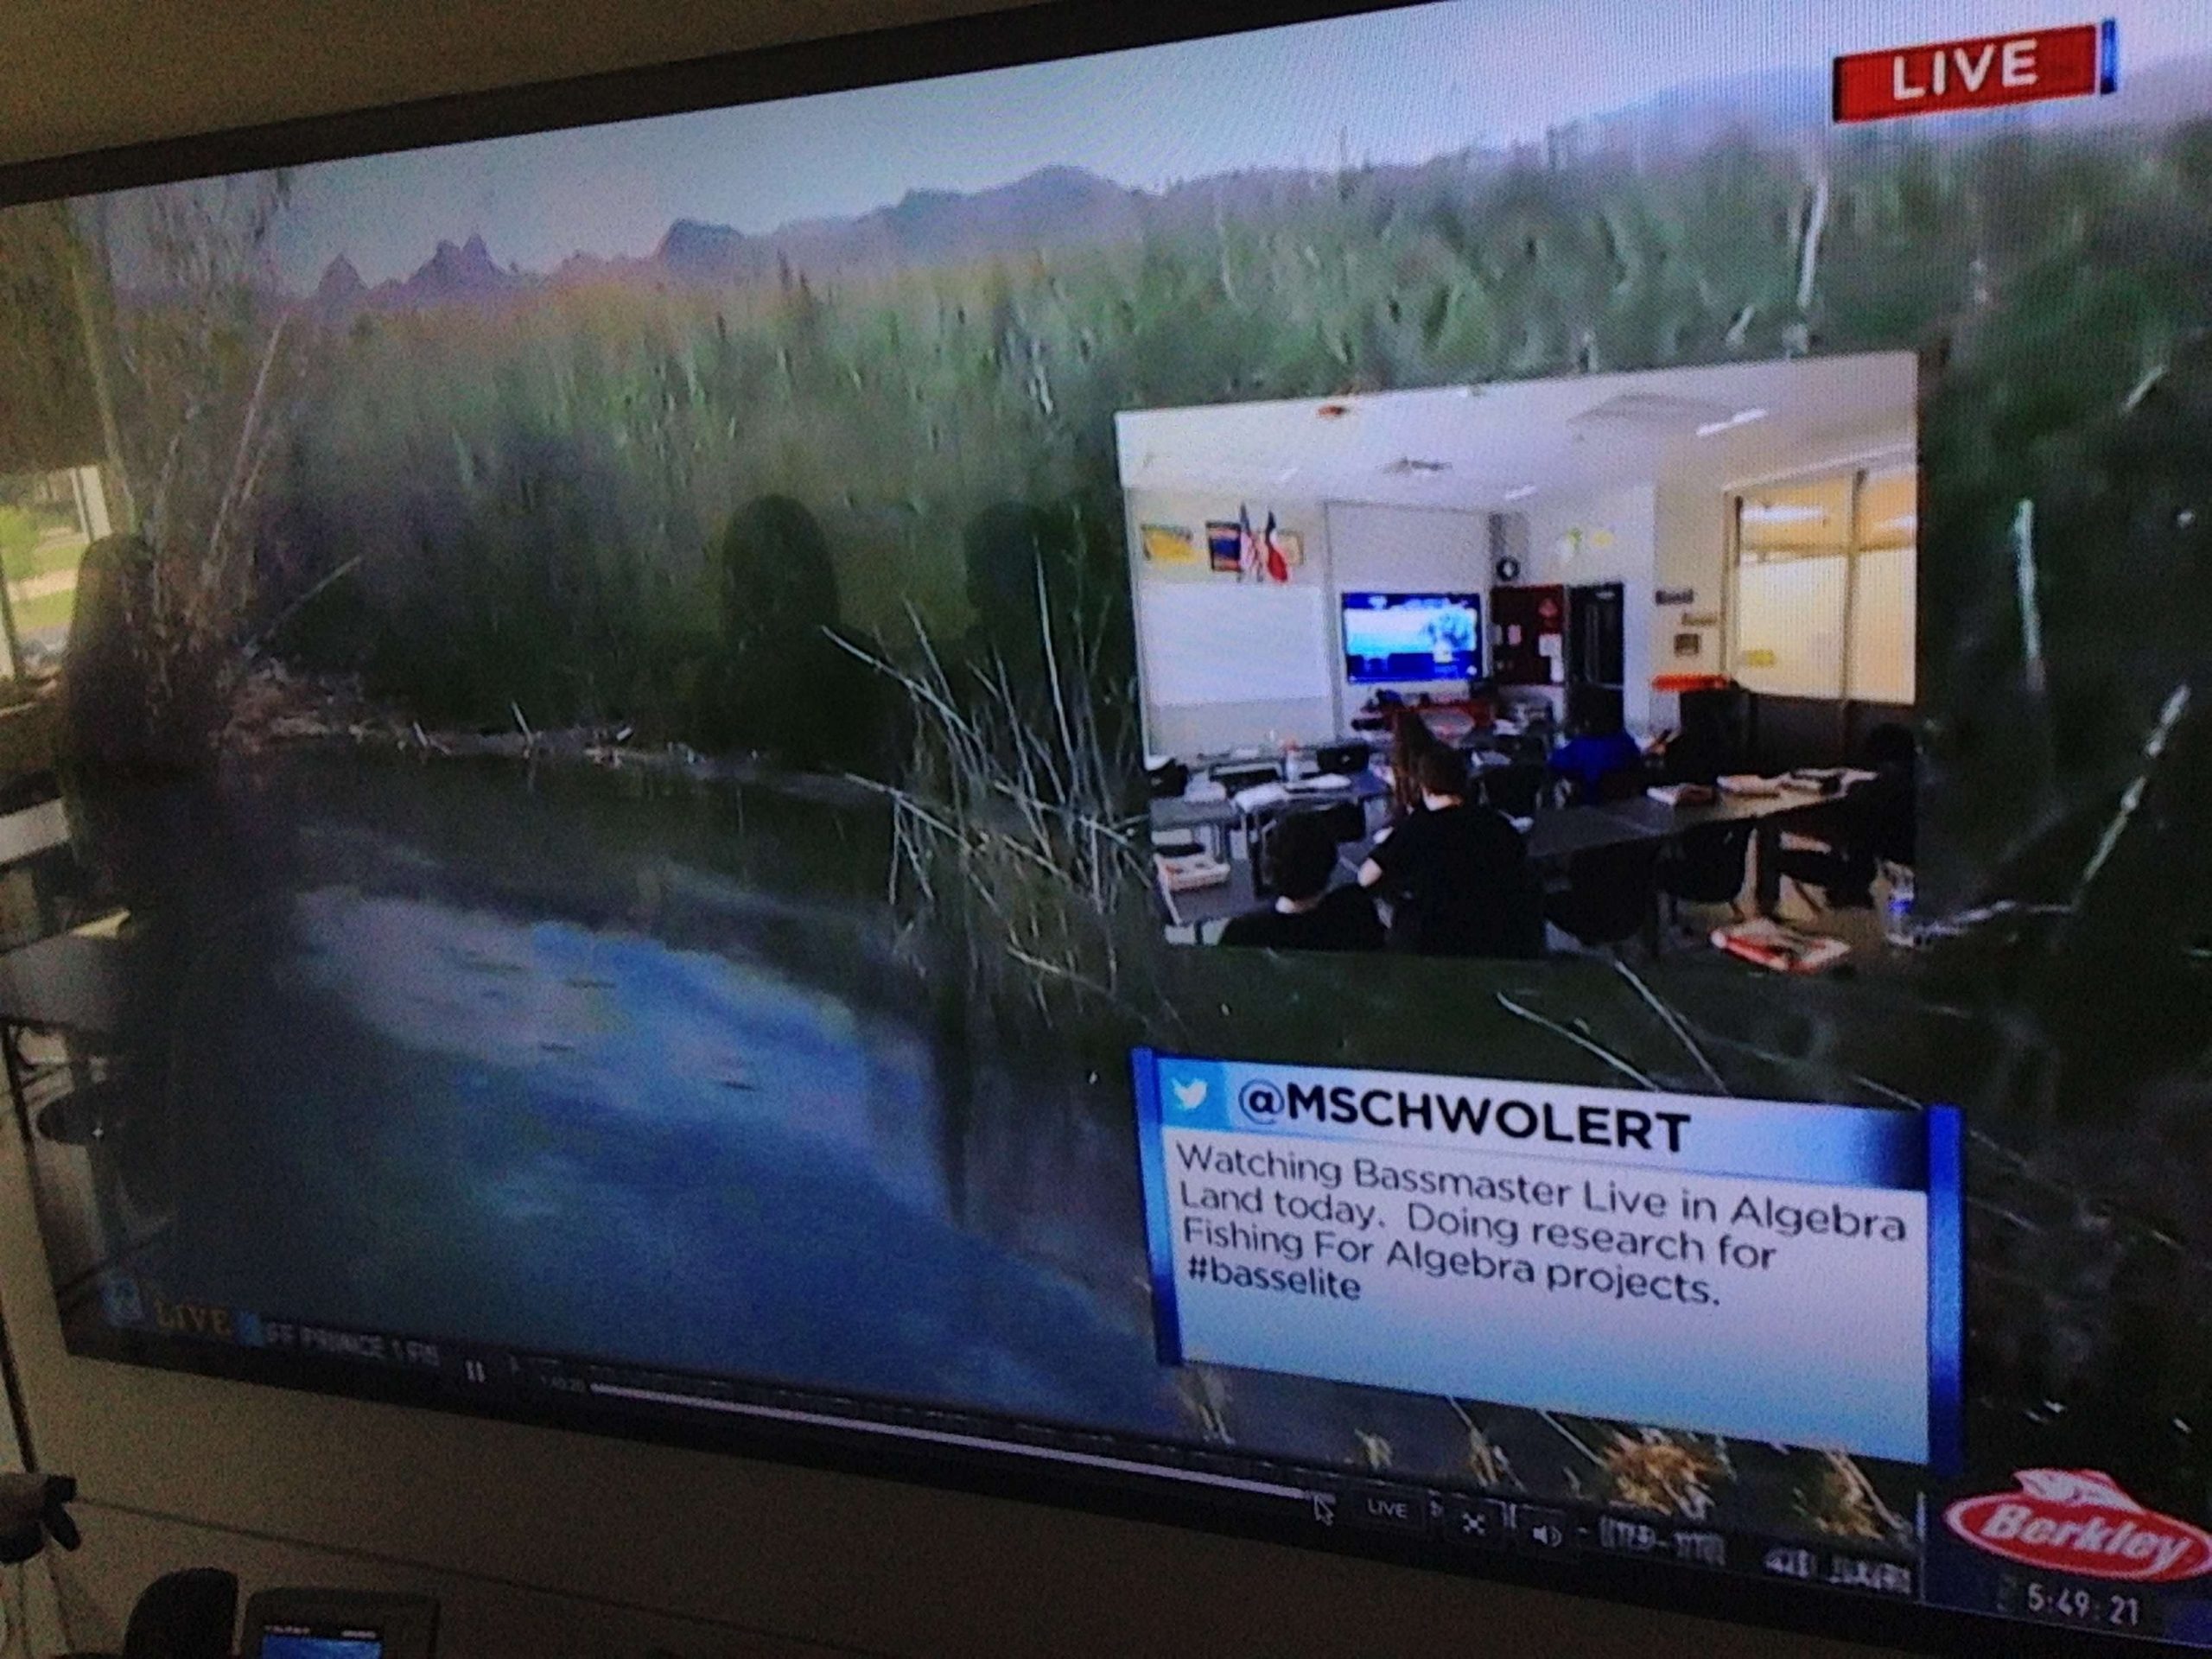 One of the class' tweets was posted on the Bassmaster LIVE show.